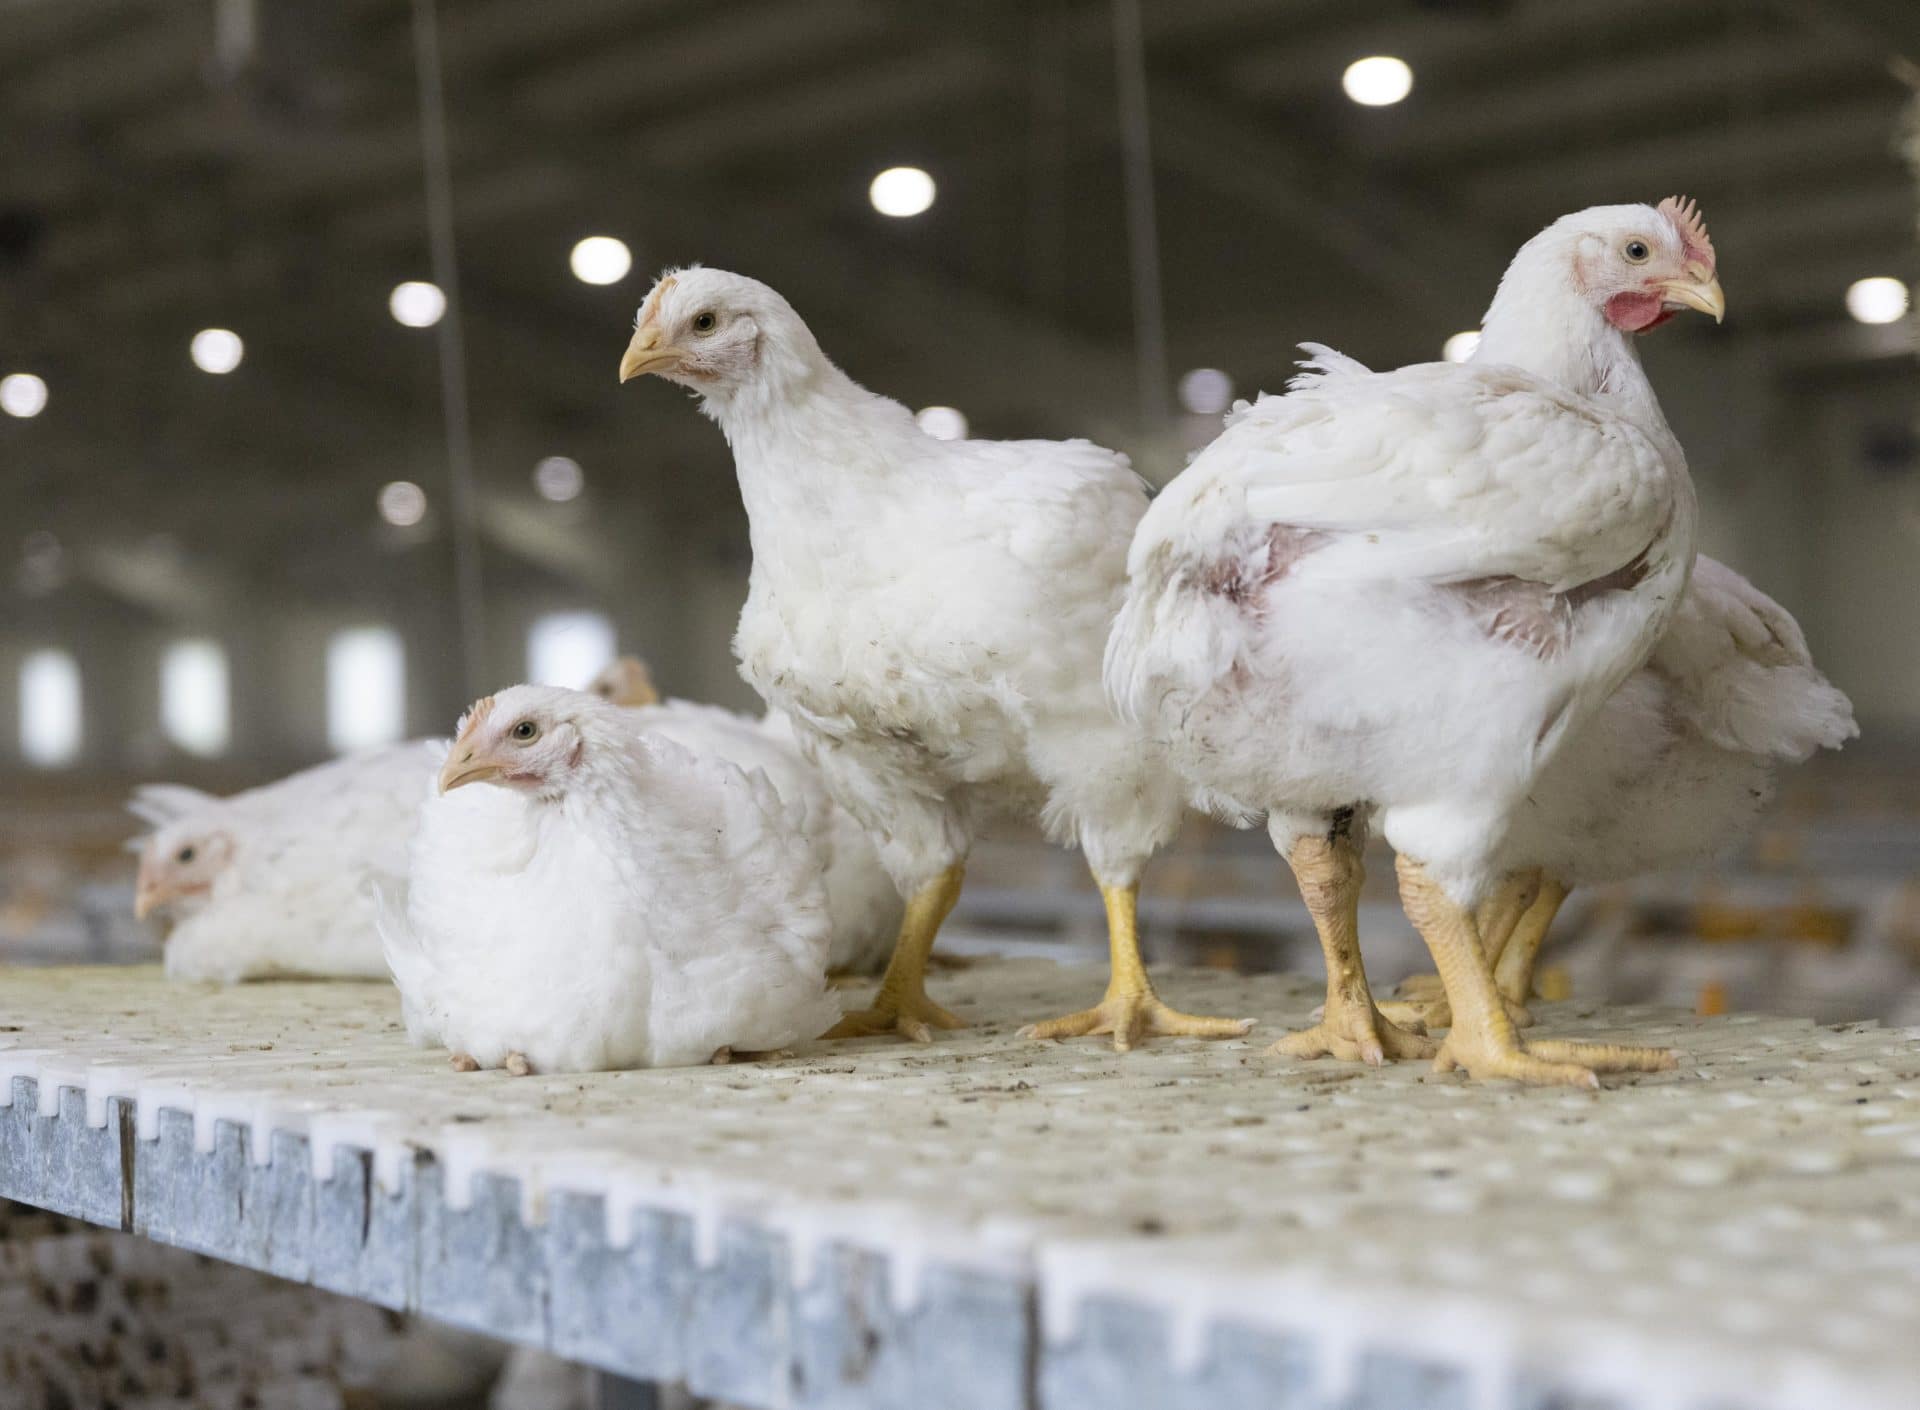 More space and daylight for nearly 20% of Norwegian chickens -  Dyrevernalliansen